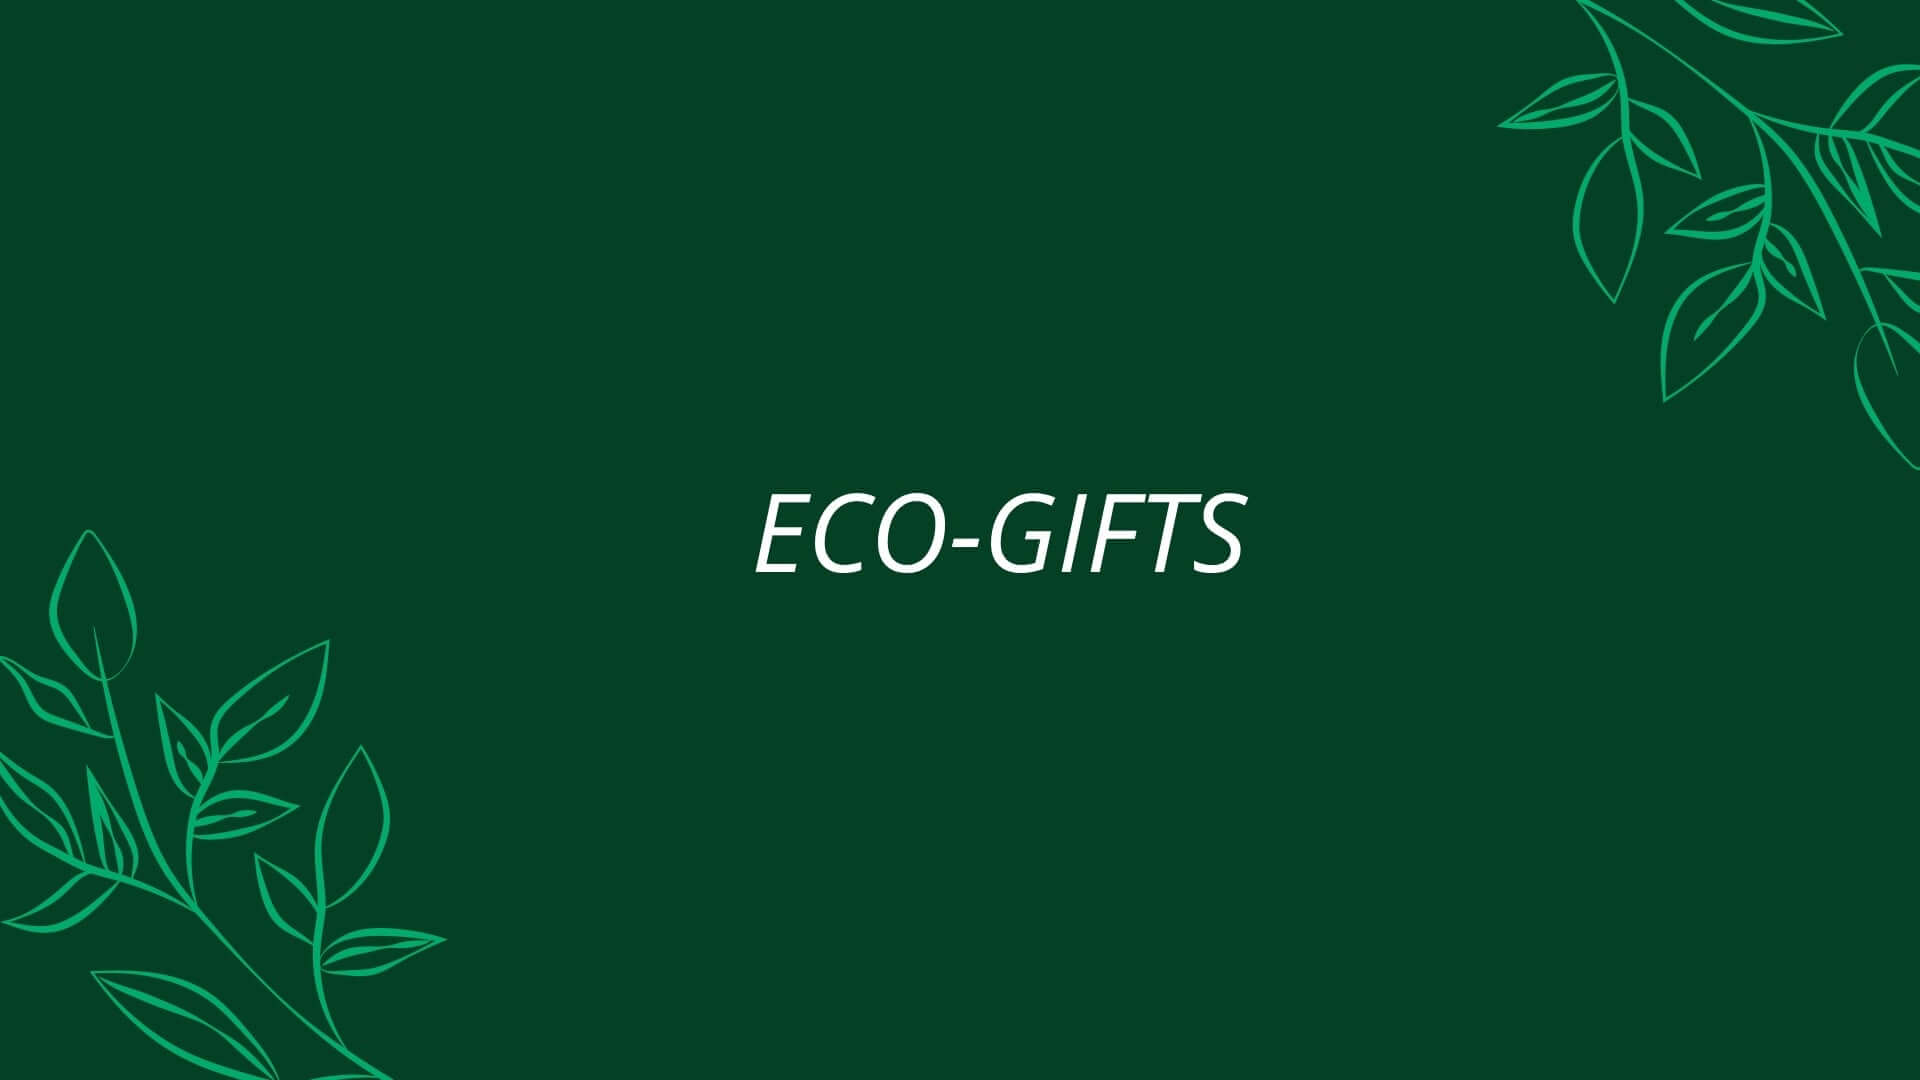 Eco-Friendly Gifts From Carrinet